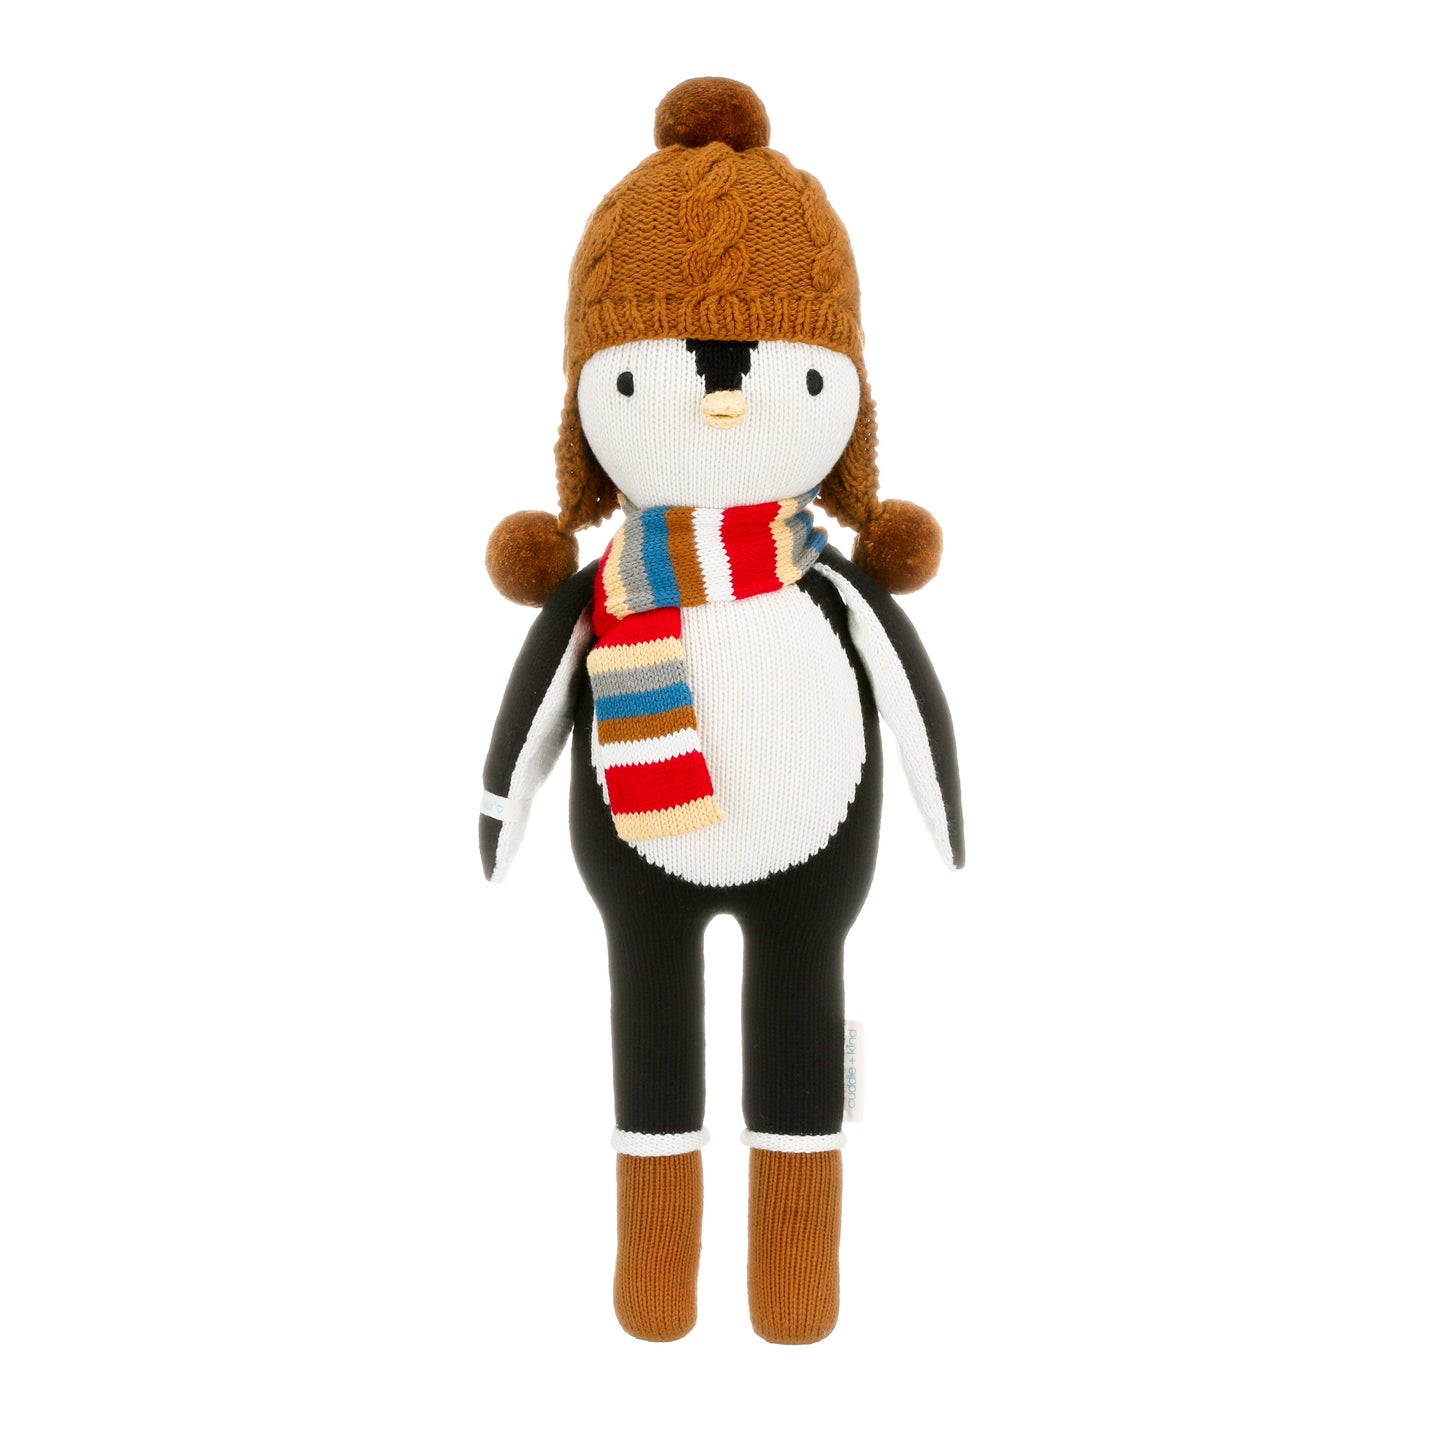 Everest the penguin shown from 360°. Everest is wearing a striped red, yellow, gray, blue and brown scarf, with a brown hat and brown boots.